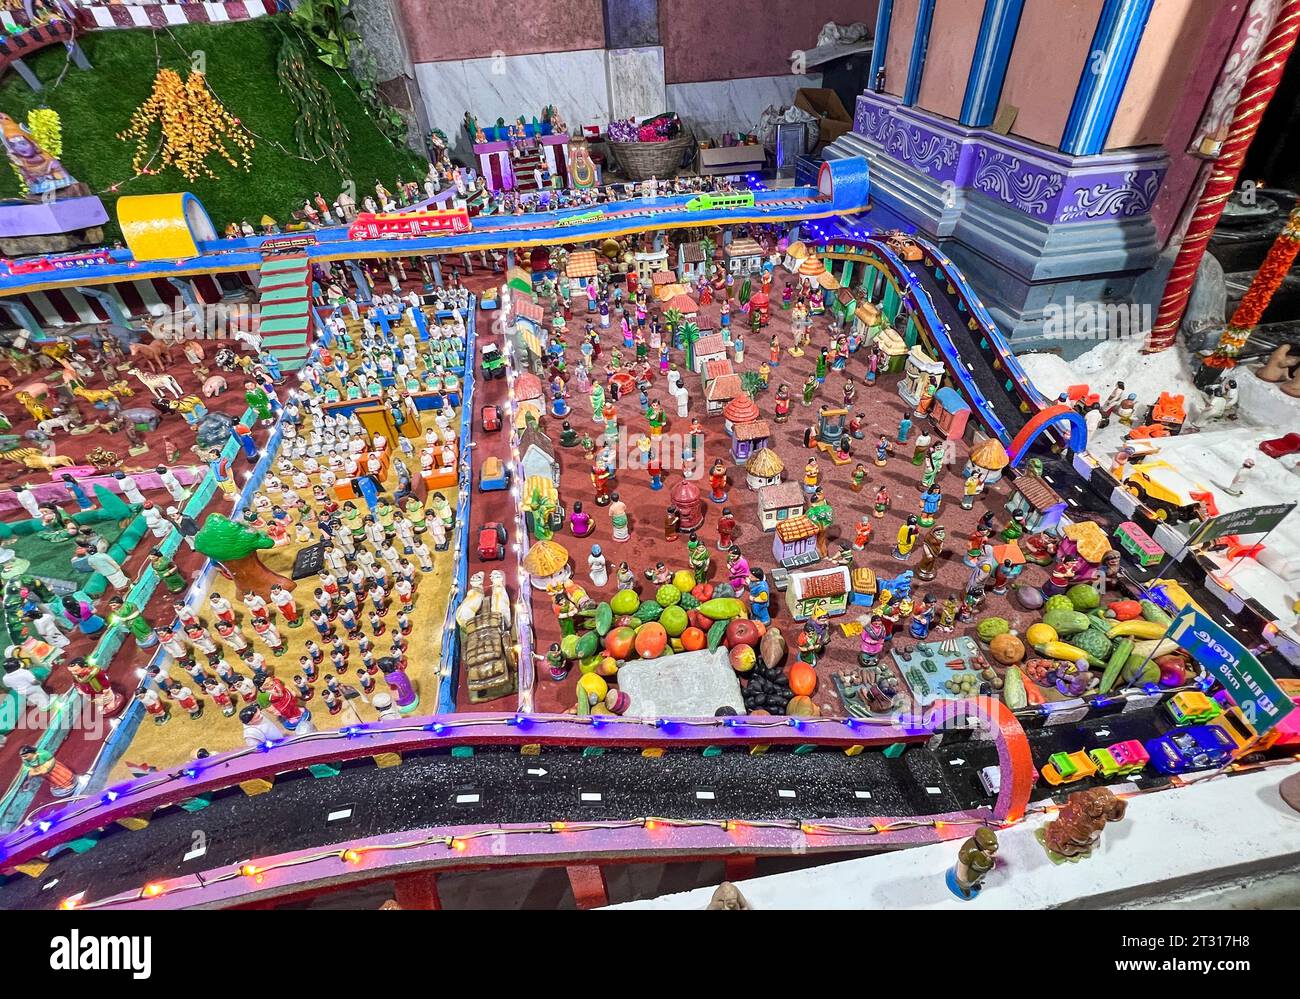 Chennai, Tamil Nadu, India. 22nd Oct, 2023. The Golu festival of Navaratri celebrates the victory of good over evil, for nine auspicious nights, symbolizing the efforts of MahaDevi and celestial beings to vanquish Mahishasura.Navaratri is an annual and one of the most revered Hindu festivals observed in the honour of Mother Goddess Durga. It spans over nine nights, first in the month of Chaitra and again in the month of Sharada. Goddess Durga is worshipped during those nine days in her different incarnations. Navarathri Golu is the festive display of dolls and figurines in South India duri Stock Photo